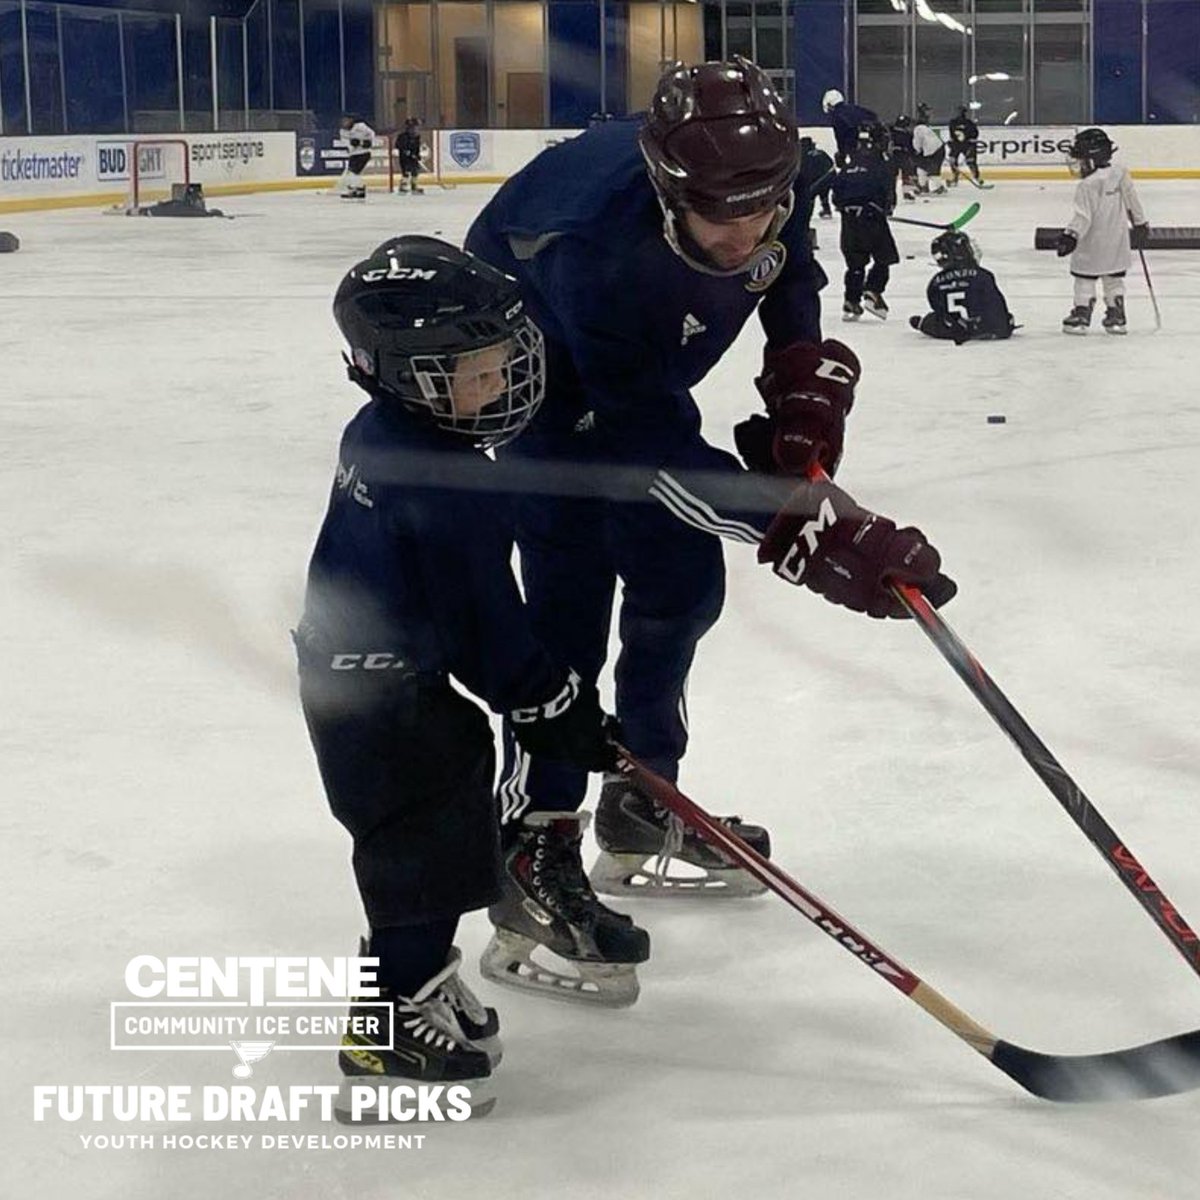 Future Draft Picks is a six-week program that uses on and off ice drills to elevate a rising youth players game✨They'll sharpen their skills, further their game knowledge, and take the next step in their development. May session enrollment: bit.ly/FDPCCIC